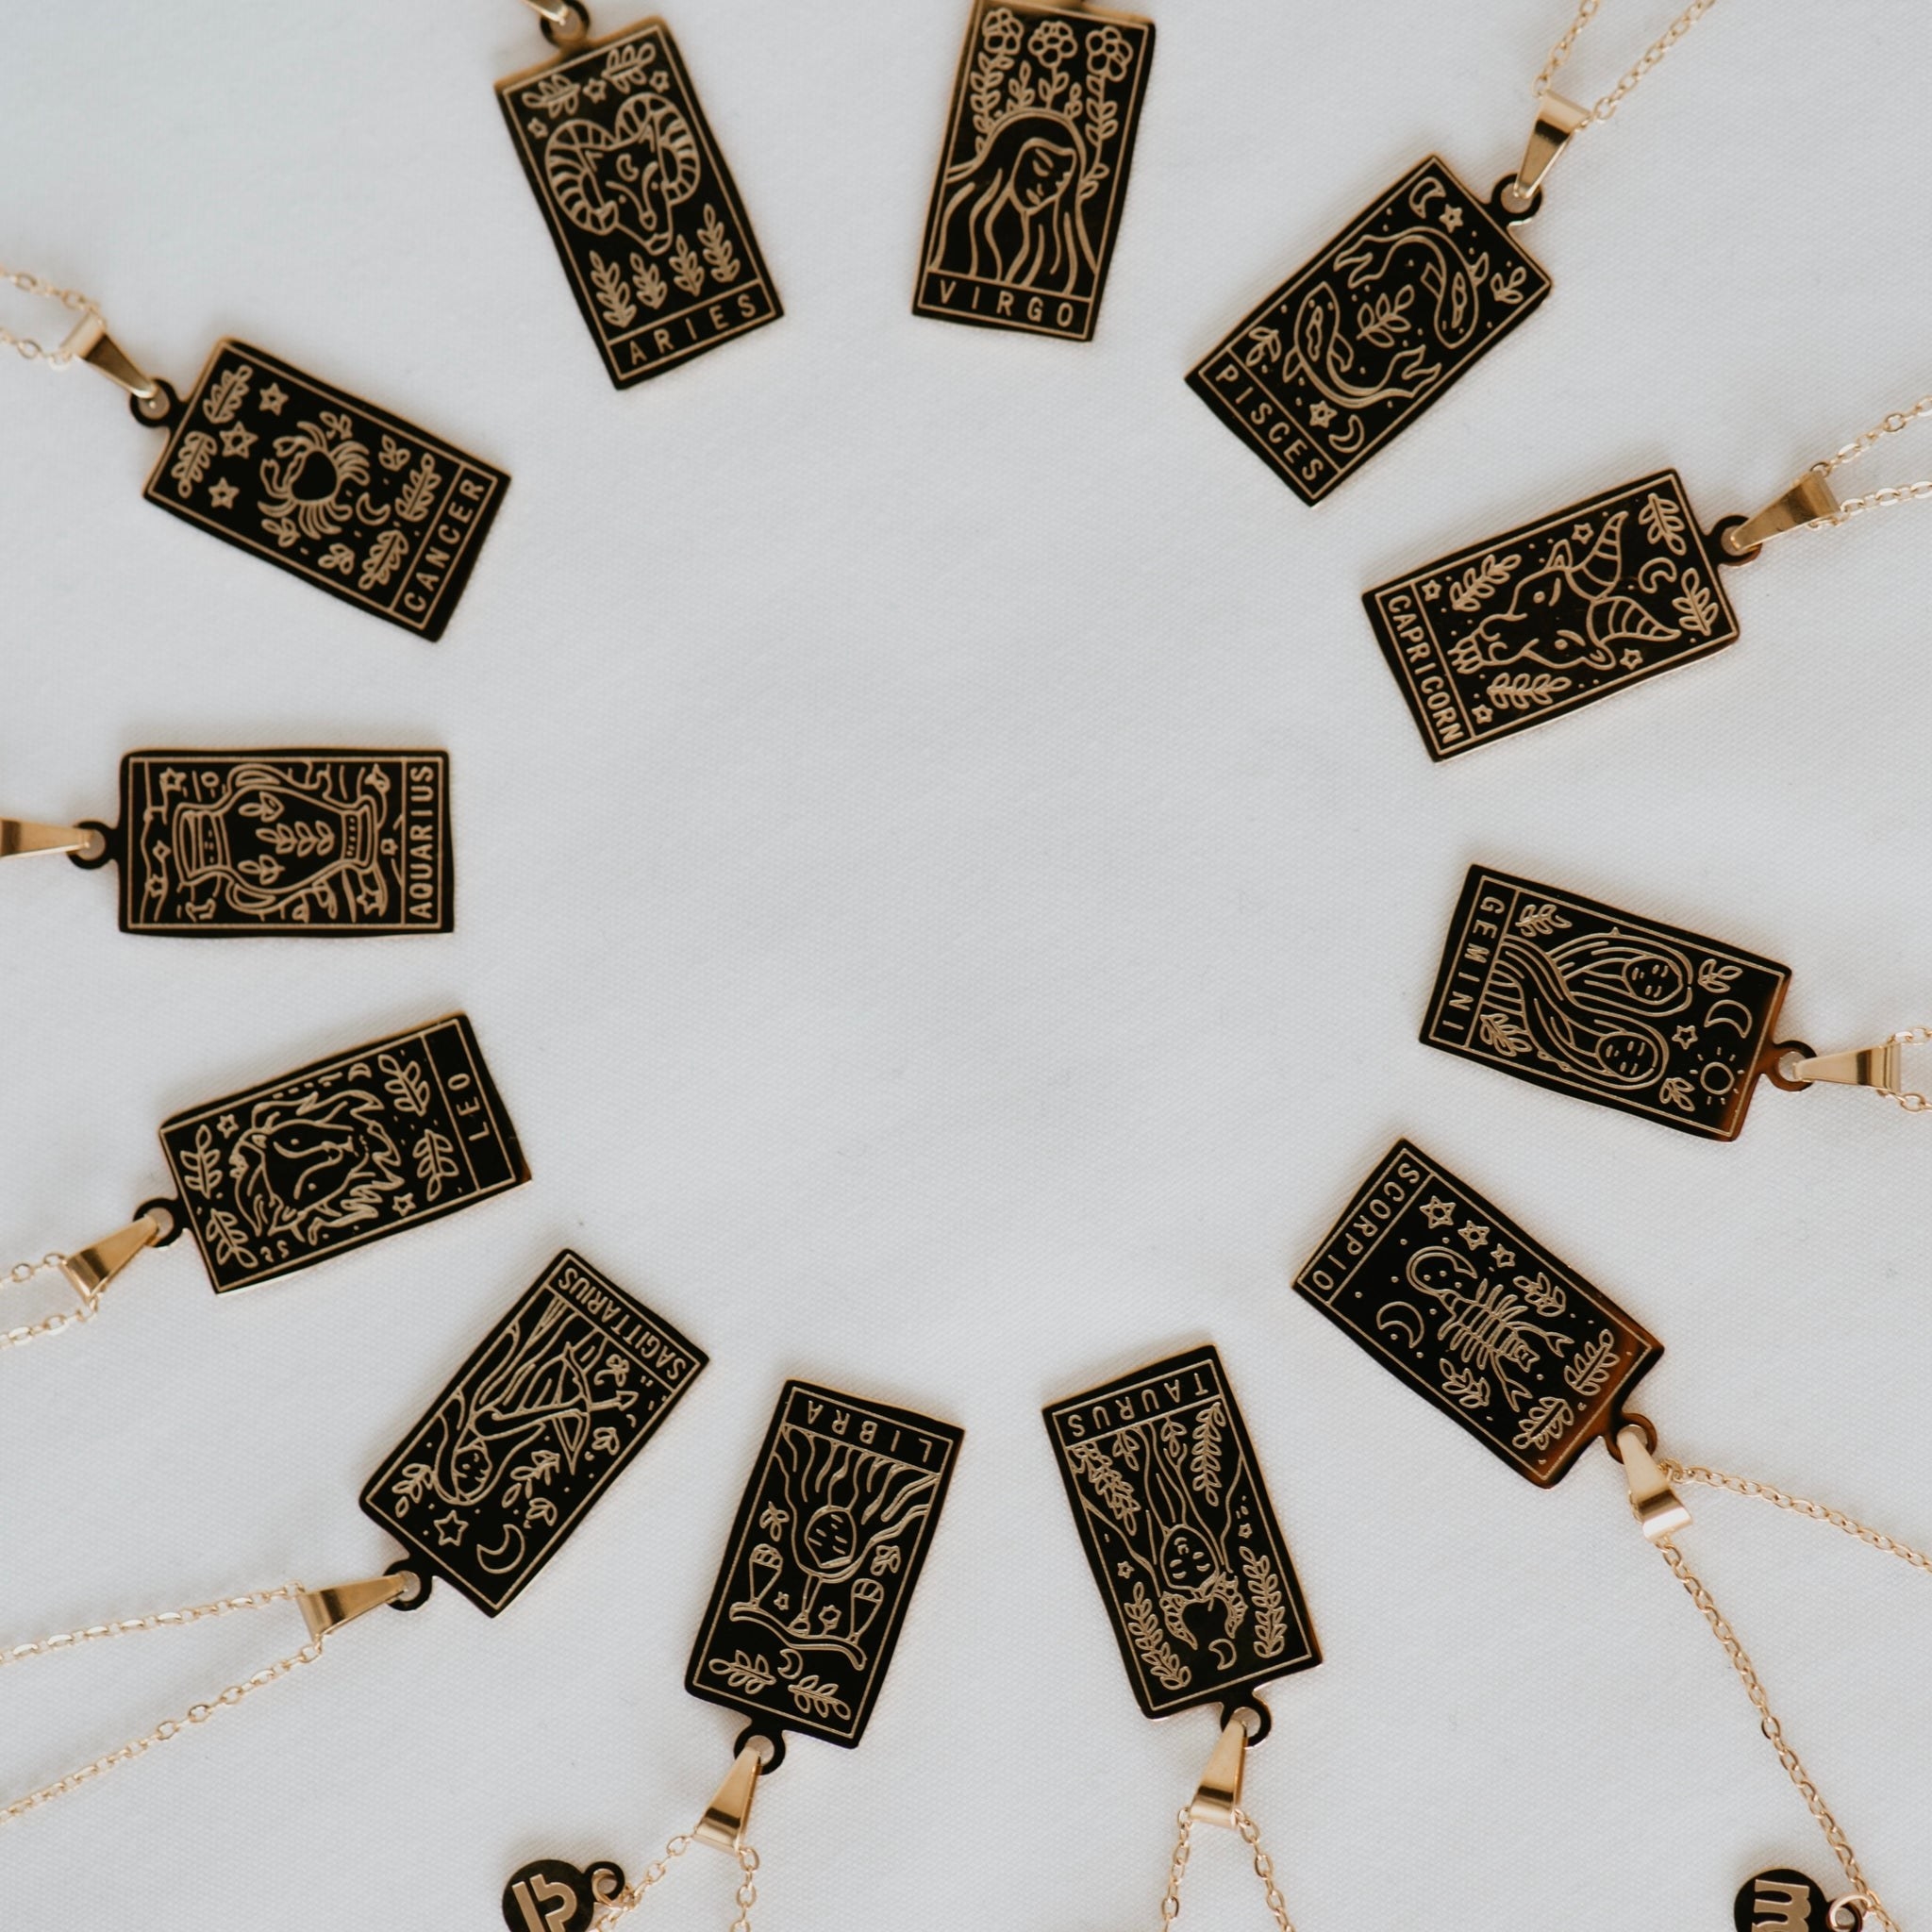 a circle of necklaces with rectangular charms that each depict a zodiac sign